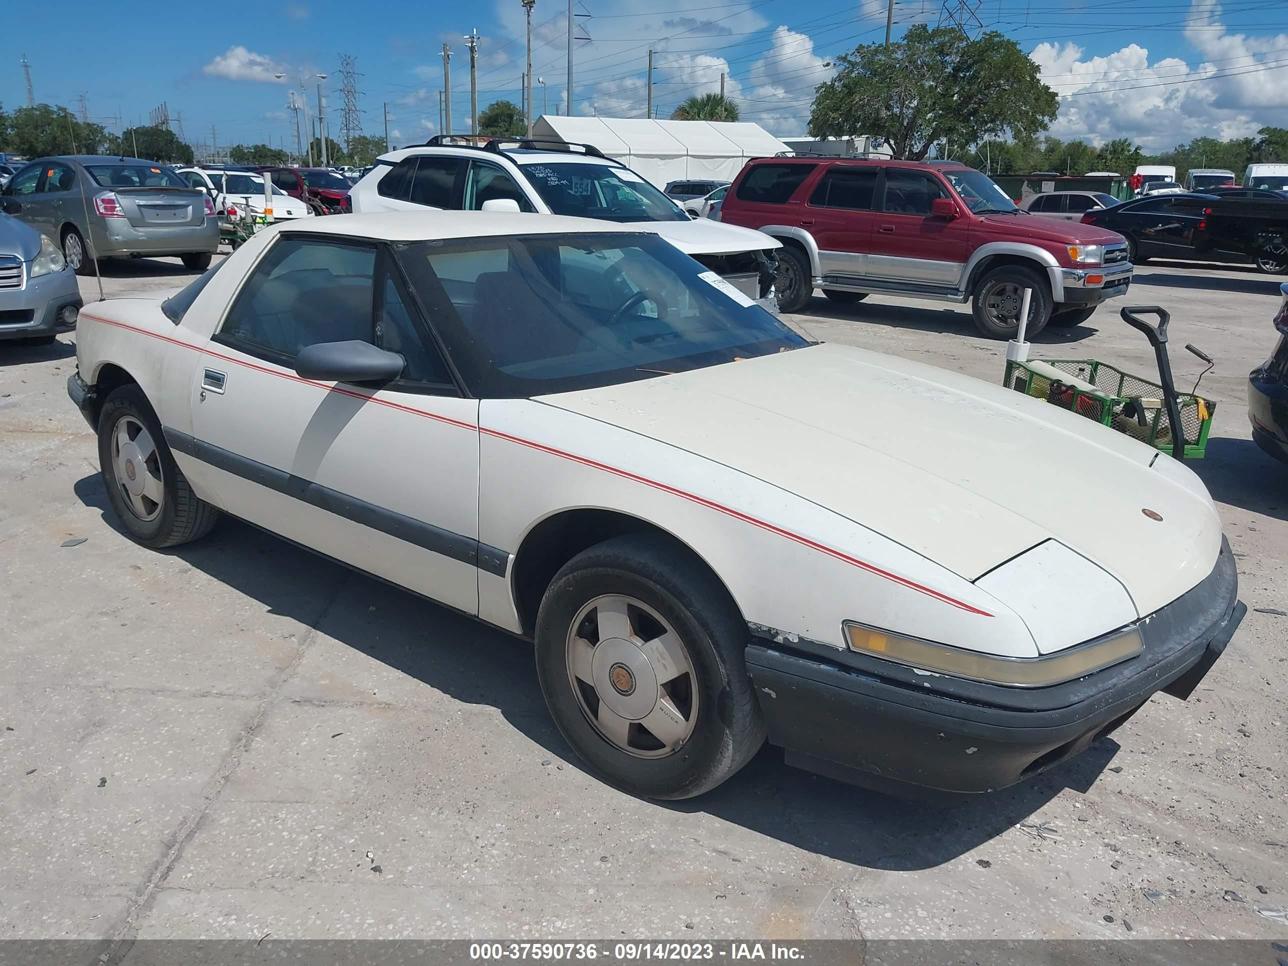 vin: 1G4EC13C8LB908113 1G4EC13C8LB908113 1990 buick reatta 3800 for Sale in 33760, 5152 126Th Ave N, Clearwater, Florida, USA